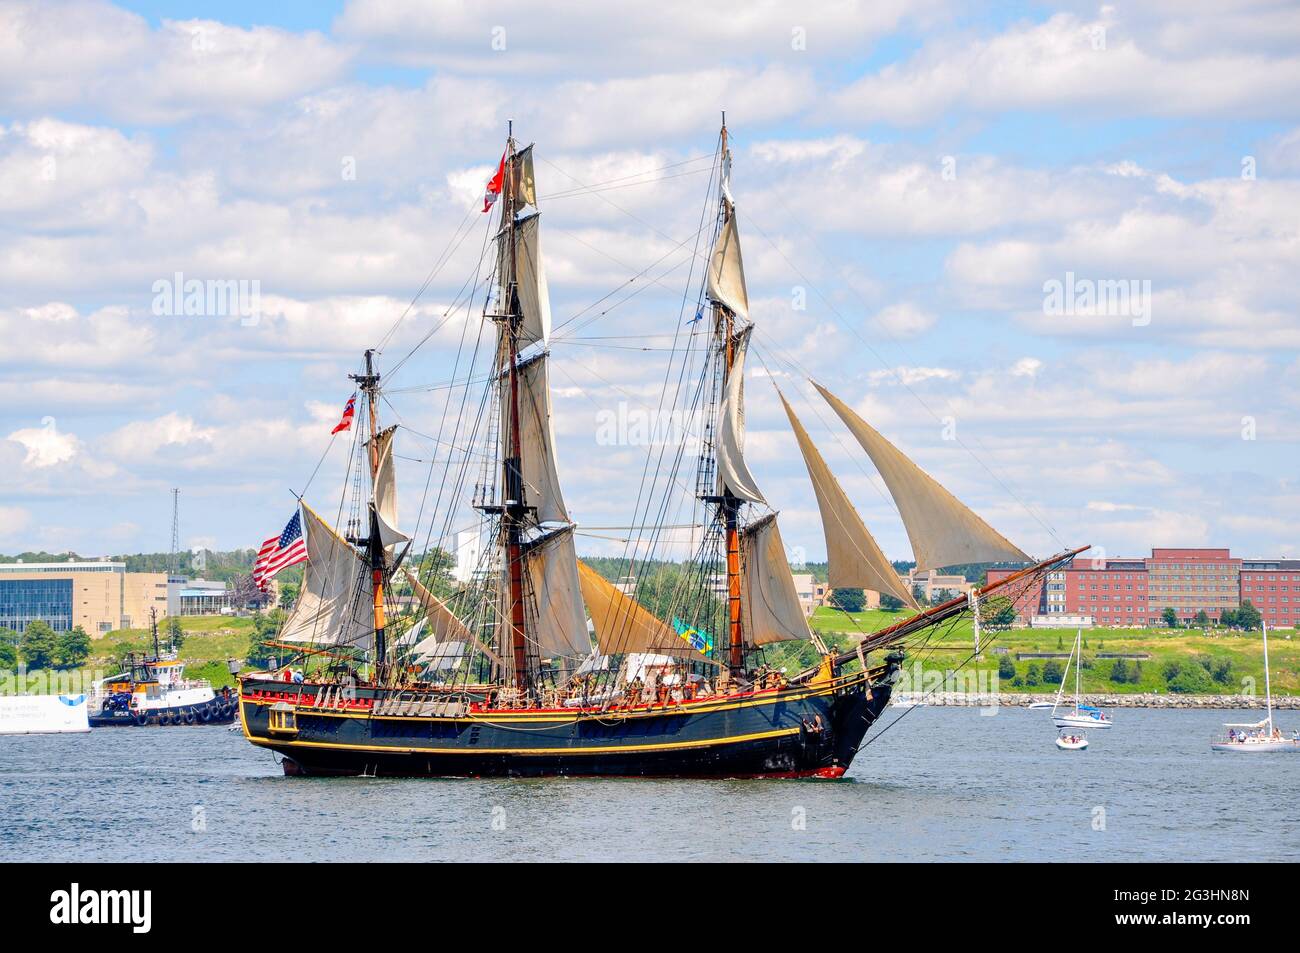 Seen during the Tall Ships parade at Halifax Harbour three years before she was lost at sea, replica ship HMS Bounty at full sail. Stock Photo